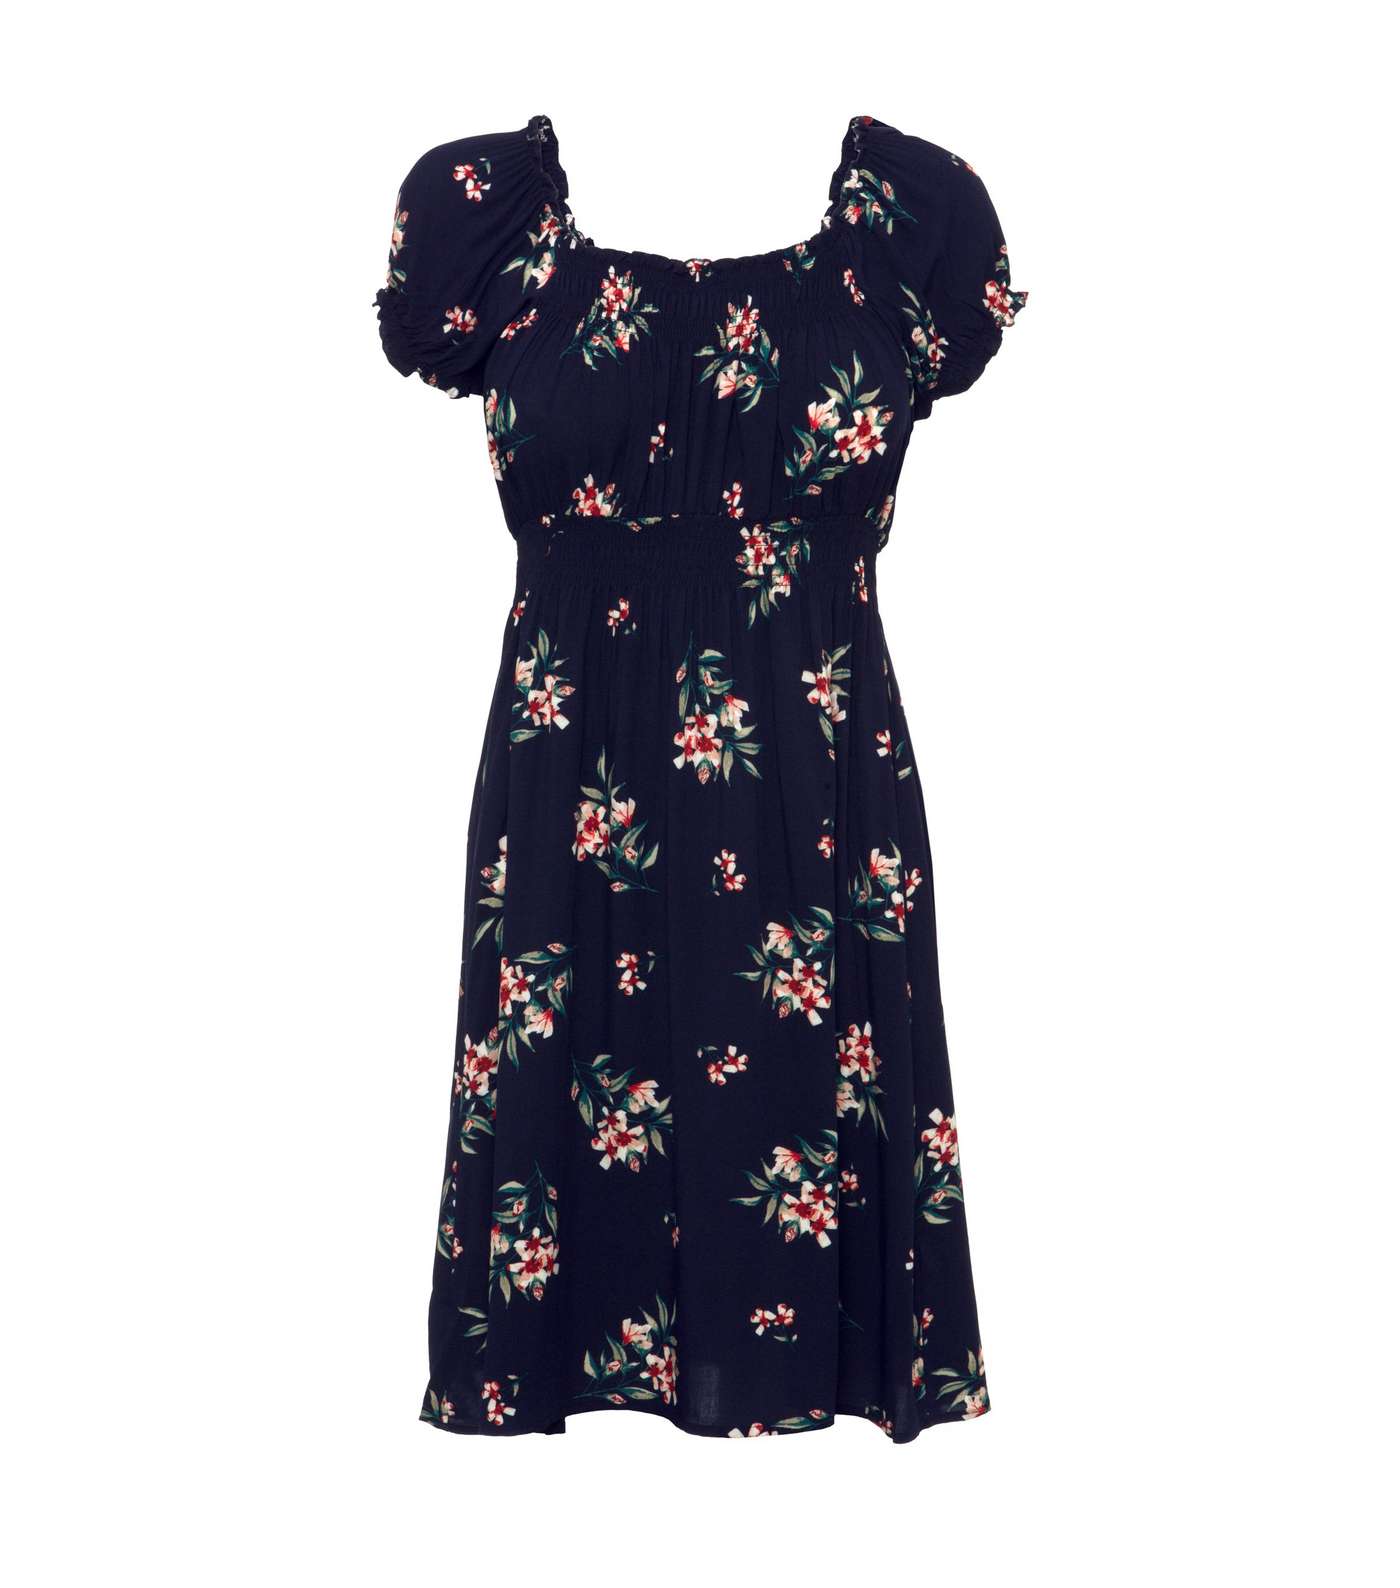 Apricot Navy Floral Milkmaid Dress Image 4